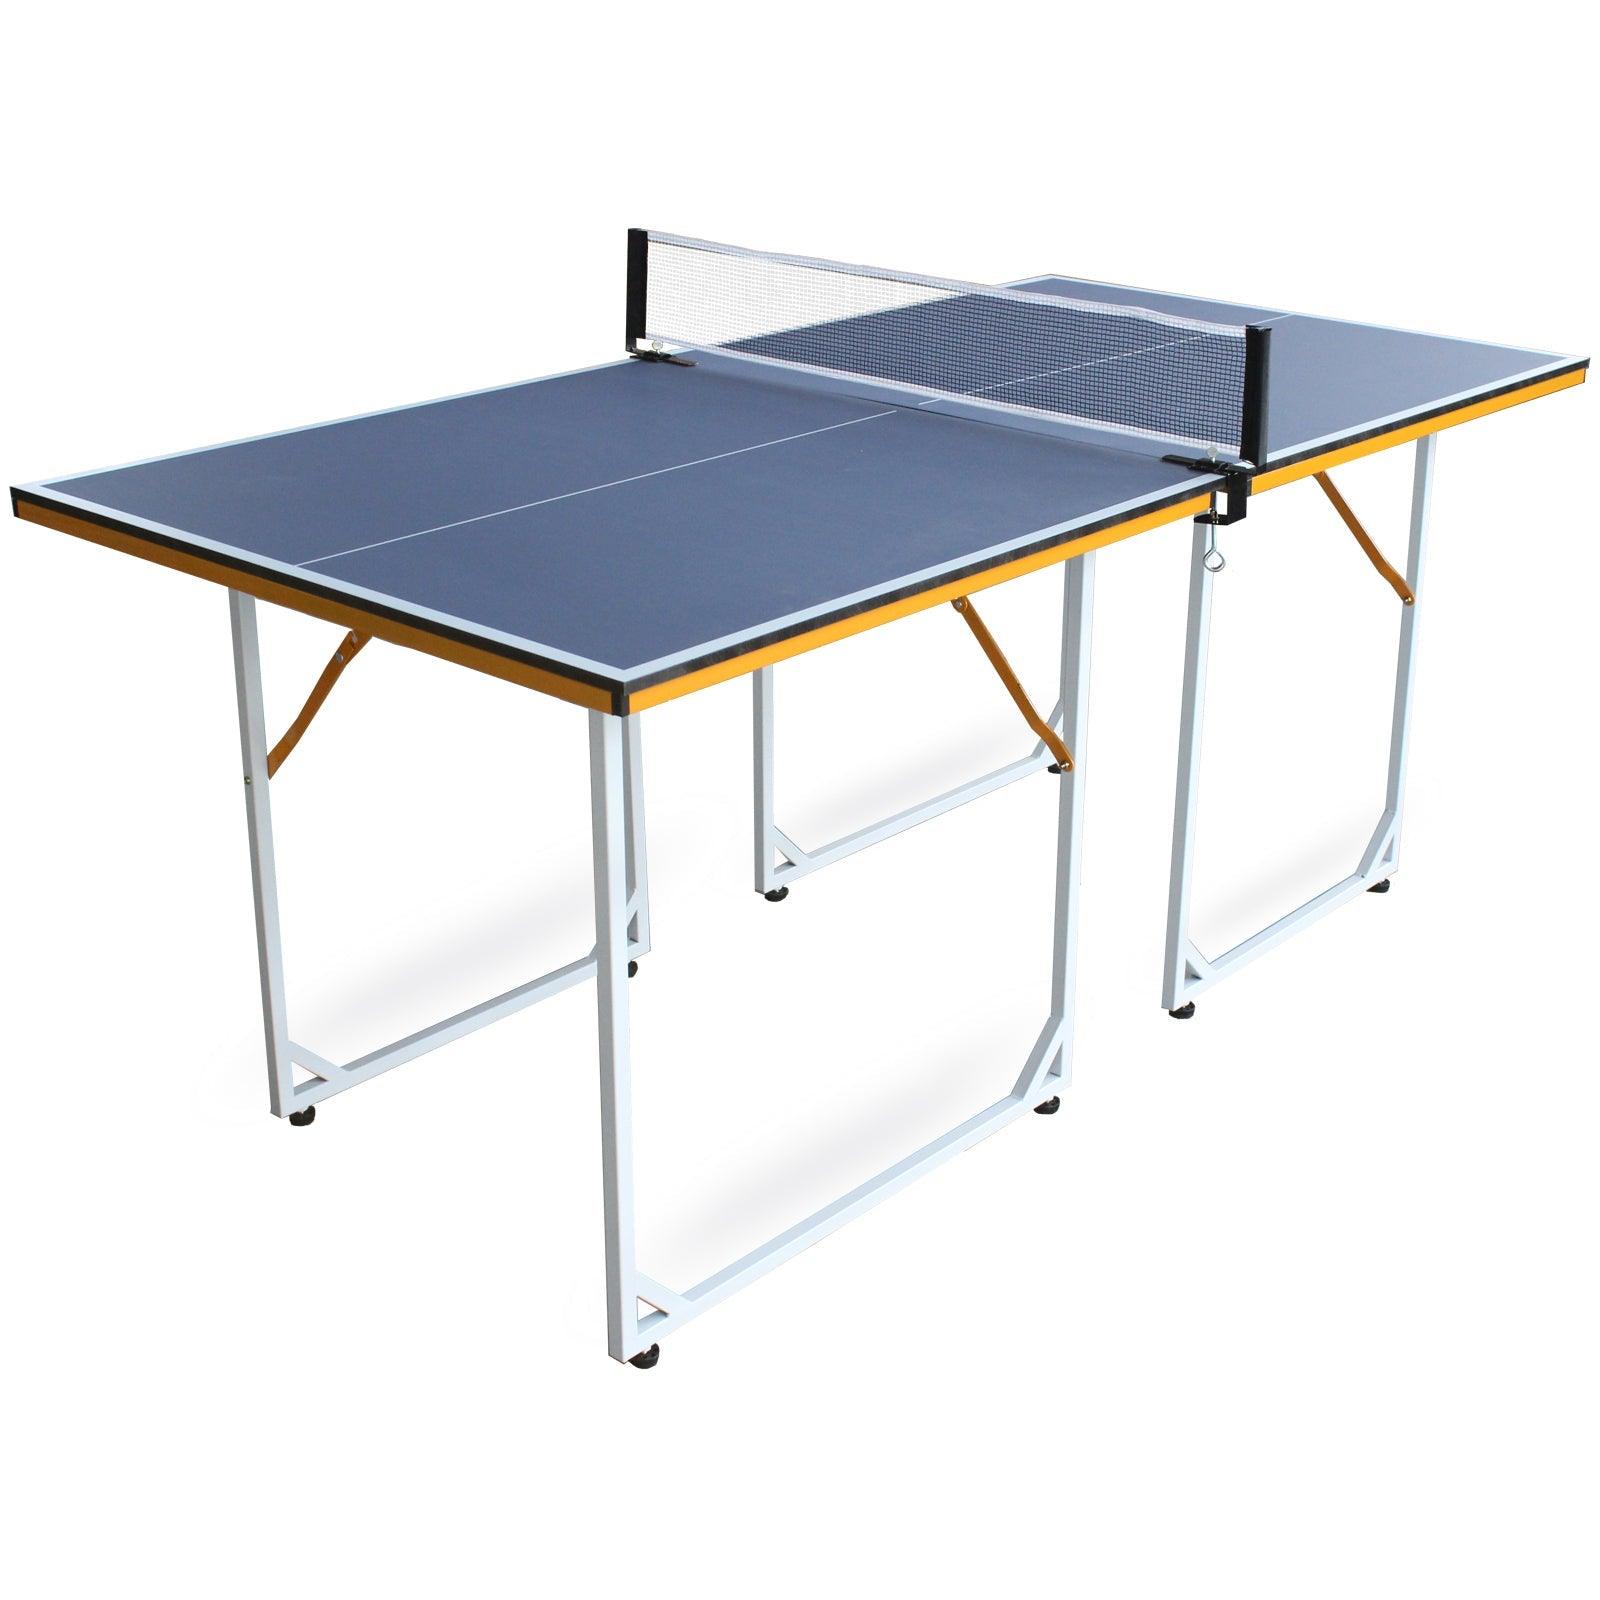 6Ft Mid-Size Table Tennis Table Foldable & Portable Ping Pong Table Set For Indoor & Outdoor Games With Net, 2 Table Tennis Paddles And 3 Balls LamCham